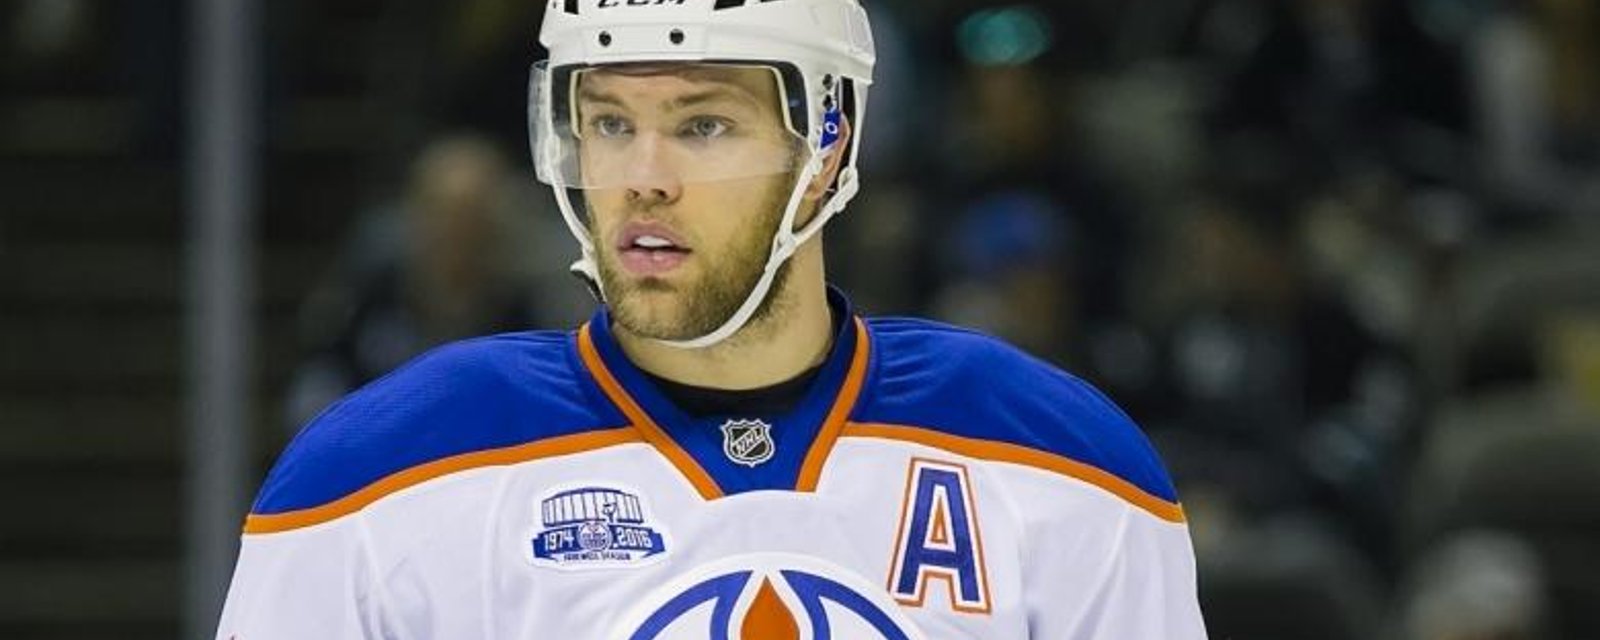 Taylor Hall gives former teammate McDavid one of the biggest compliments imaginable.